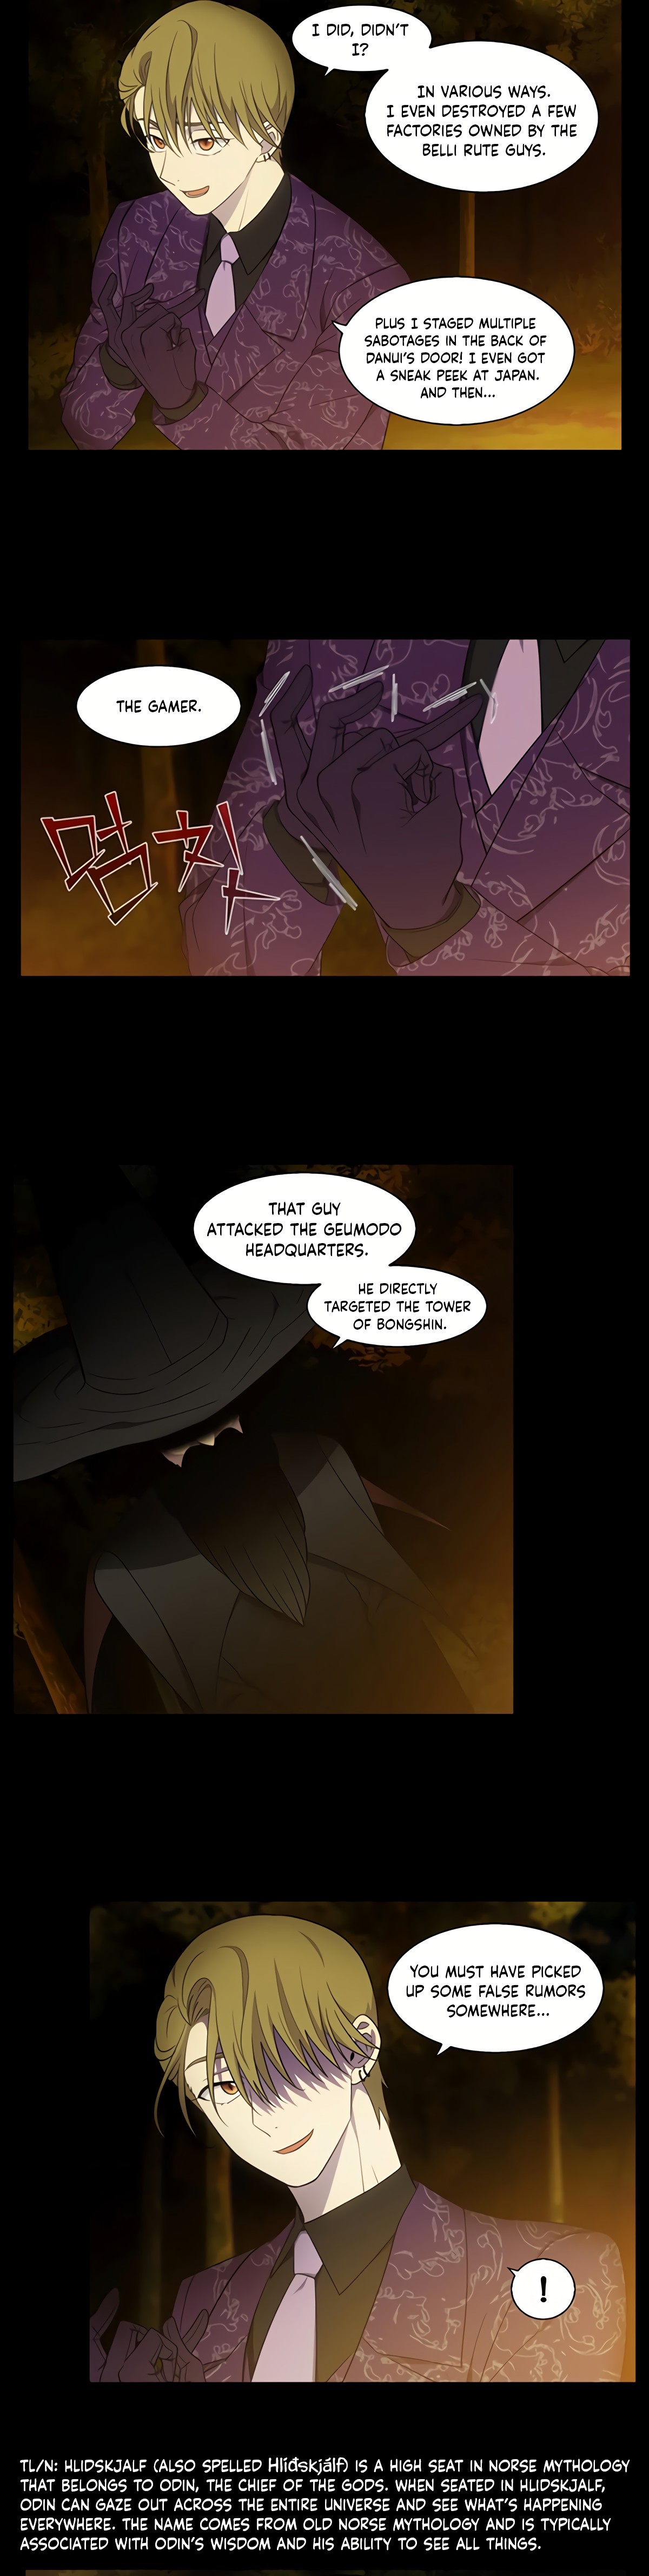 The Gamer - Chapter 467 Page 4